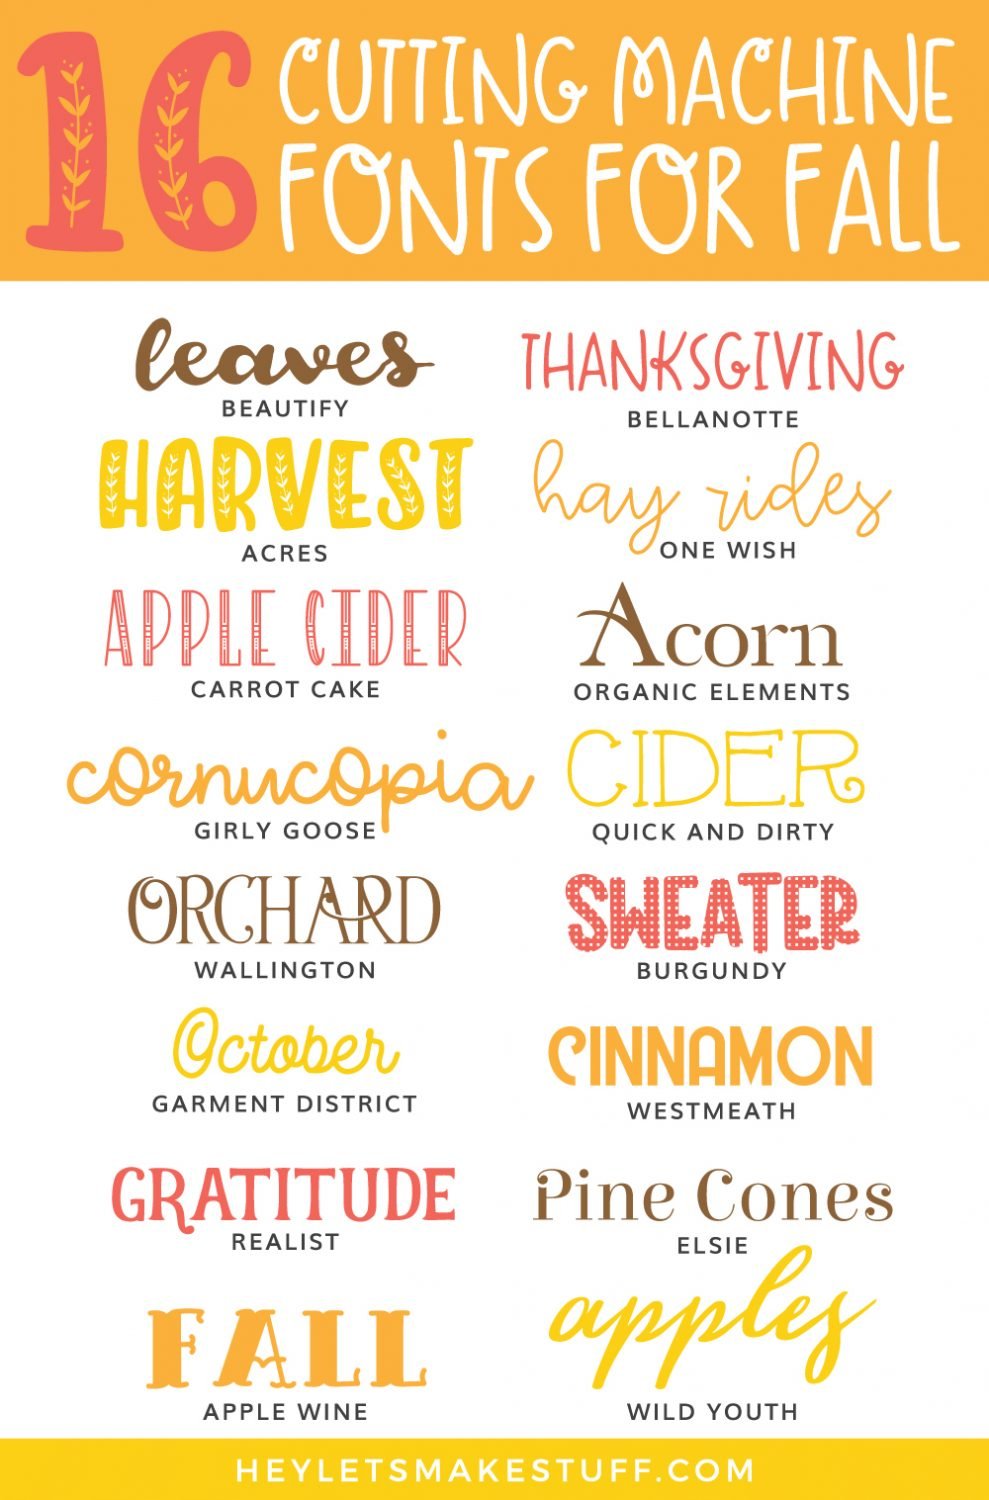 Cutting Machine Fonts for Fall pin image